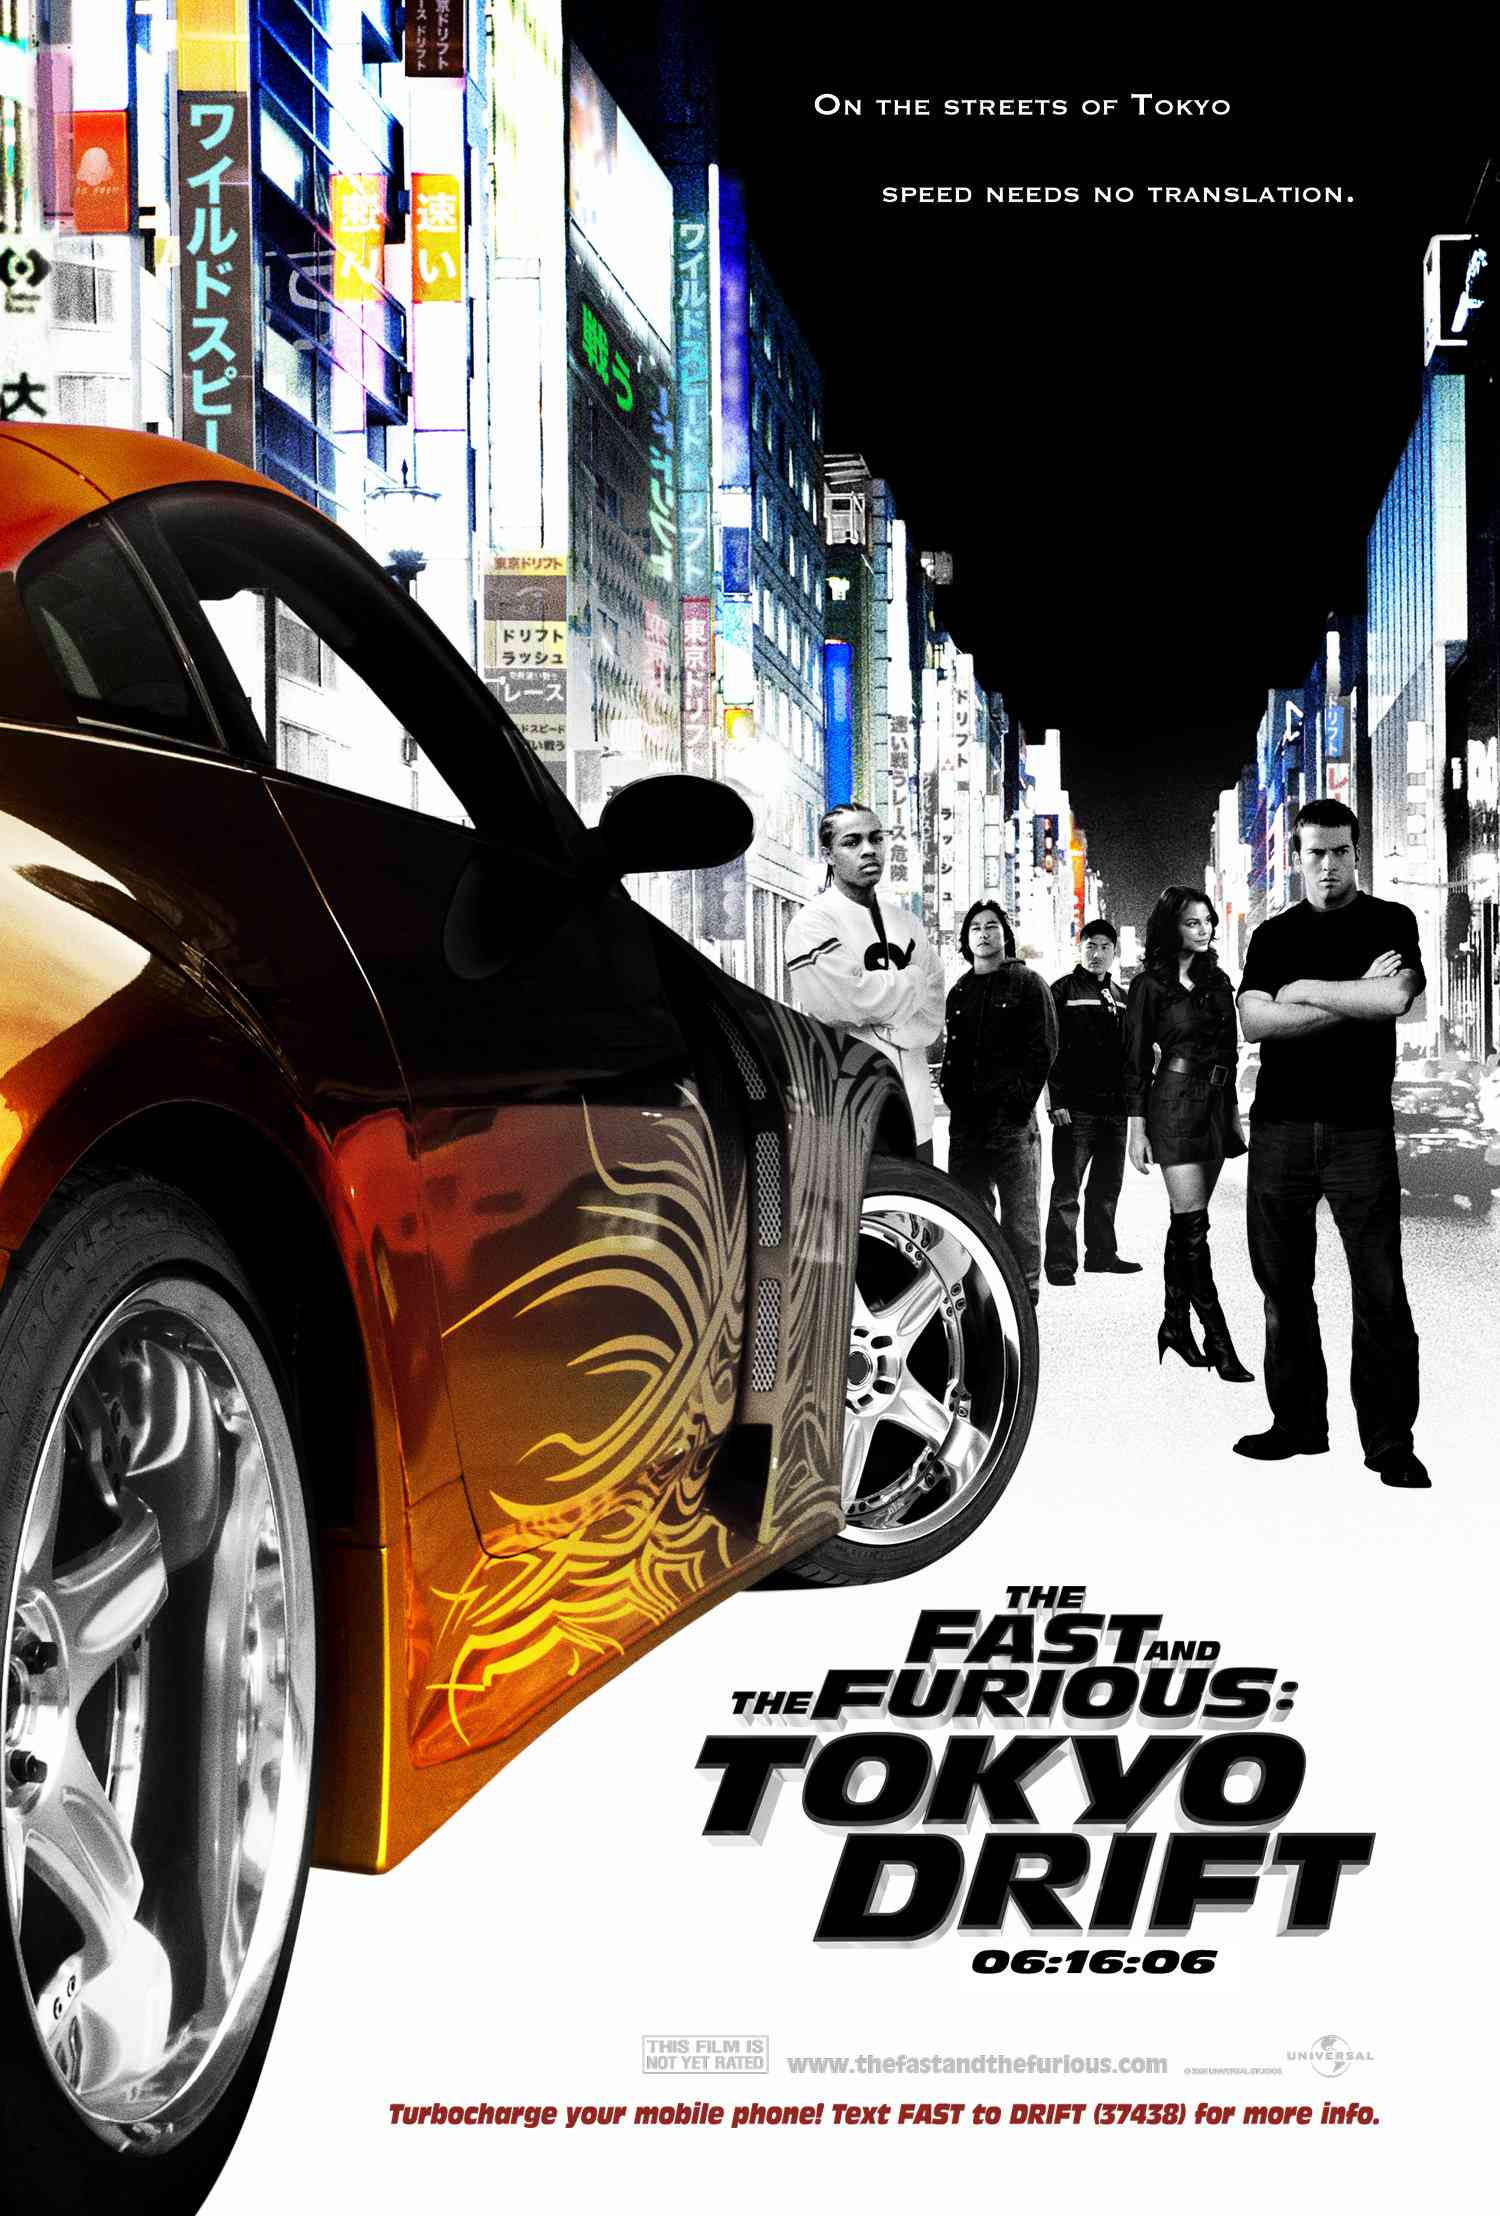 FULL MOVIE: The Fast & The Furious 3: Tokyo Drift (2006) [Action]